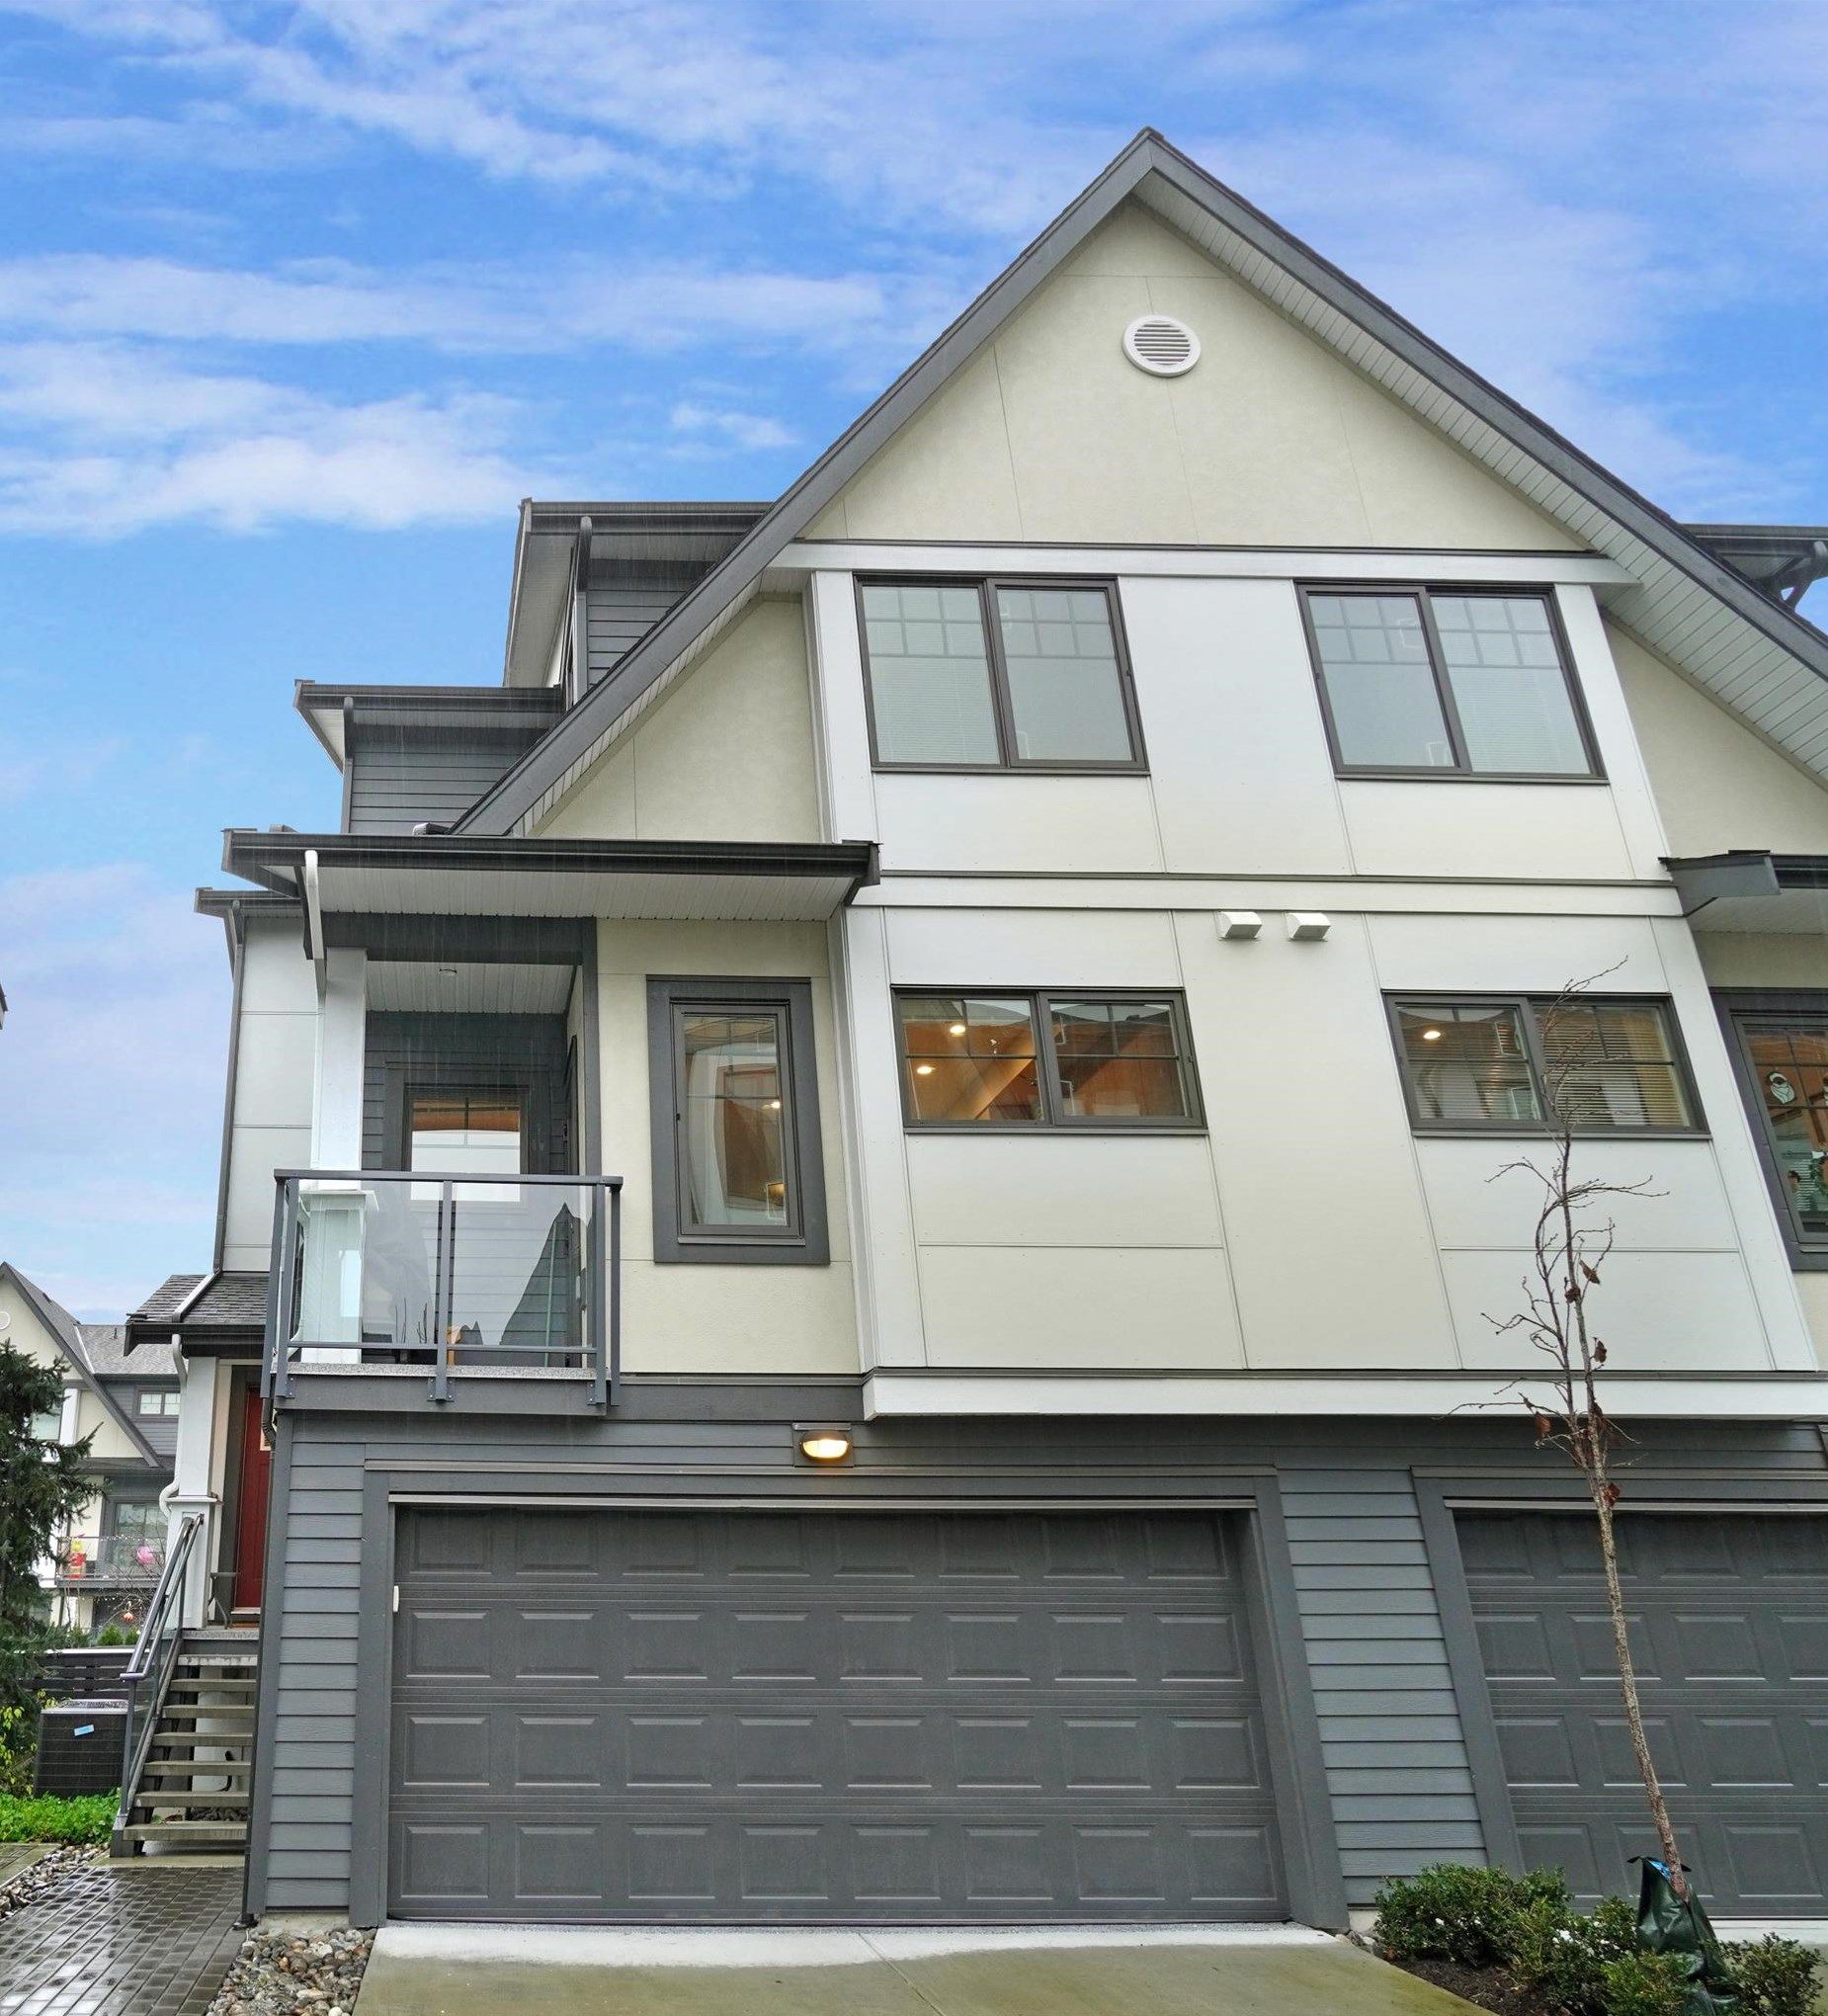 New property listed in South Meadows, Pitt Meadows